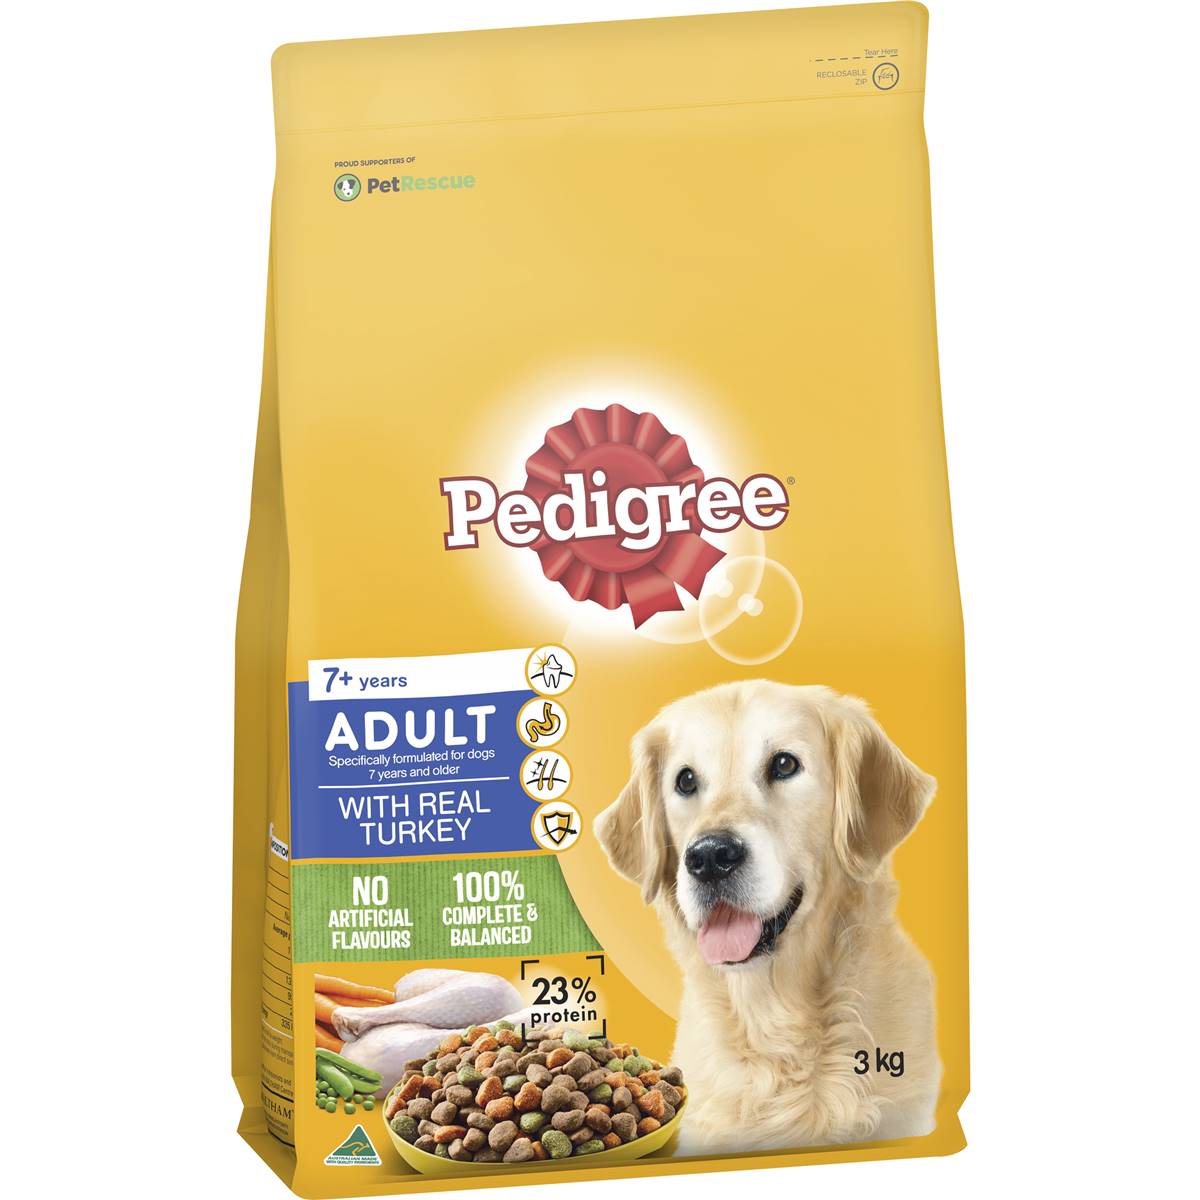 Pedigree Adult 7+ Years With Real Turkey Dry Dog Food 3kg